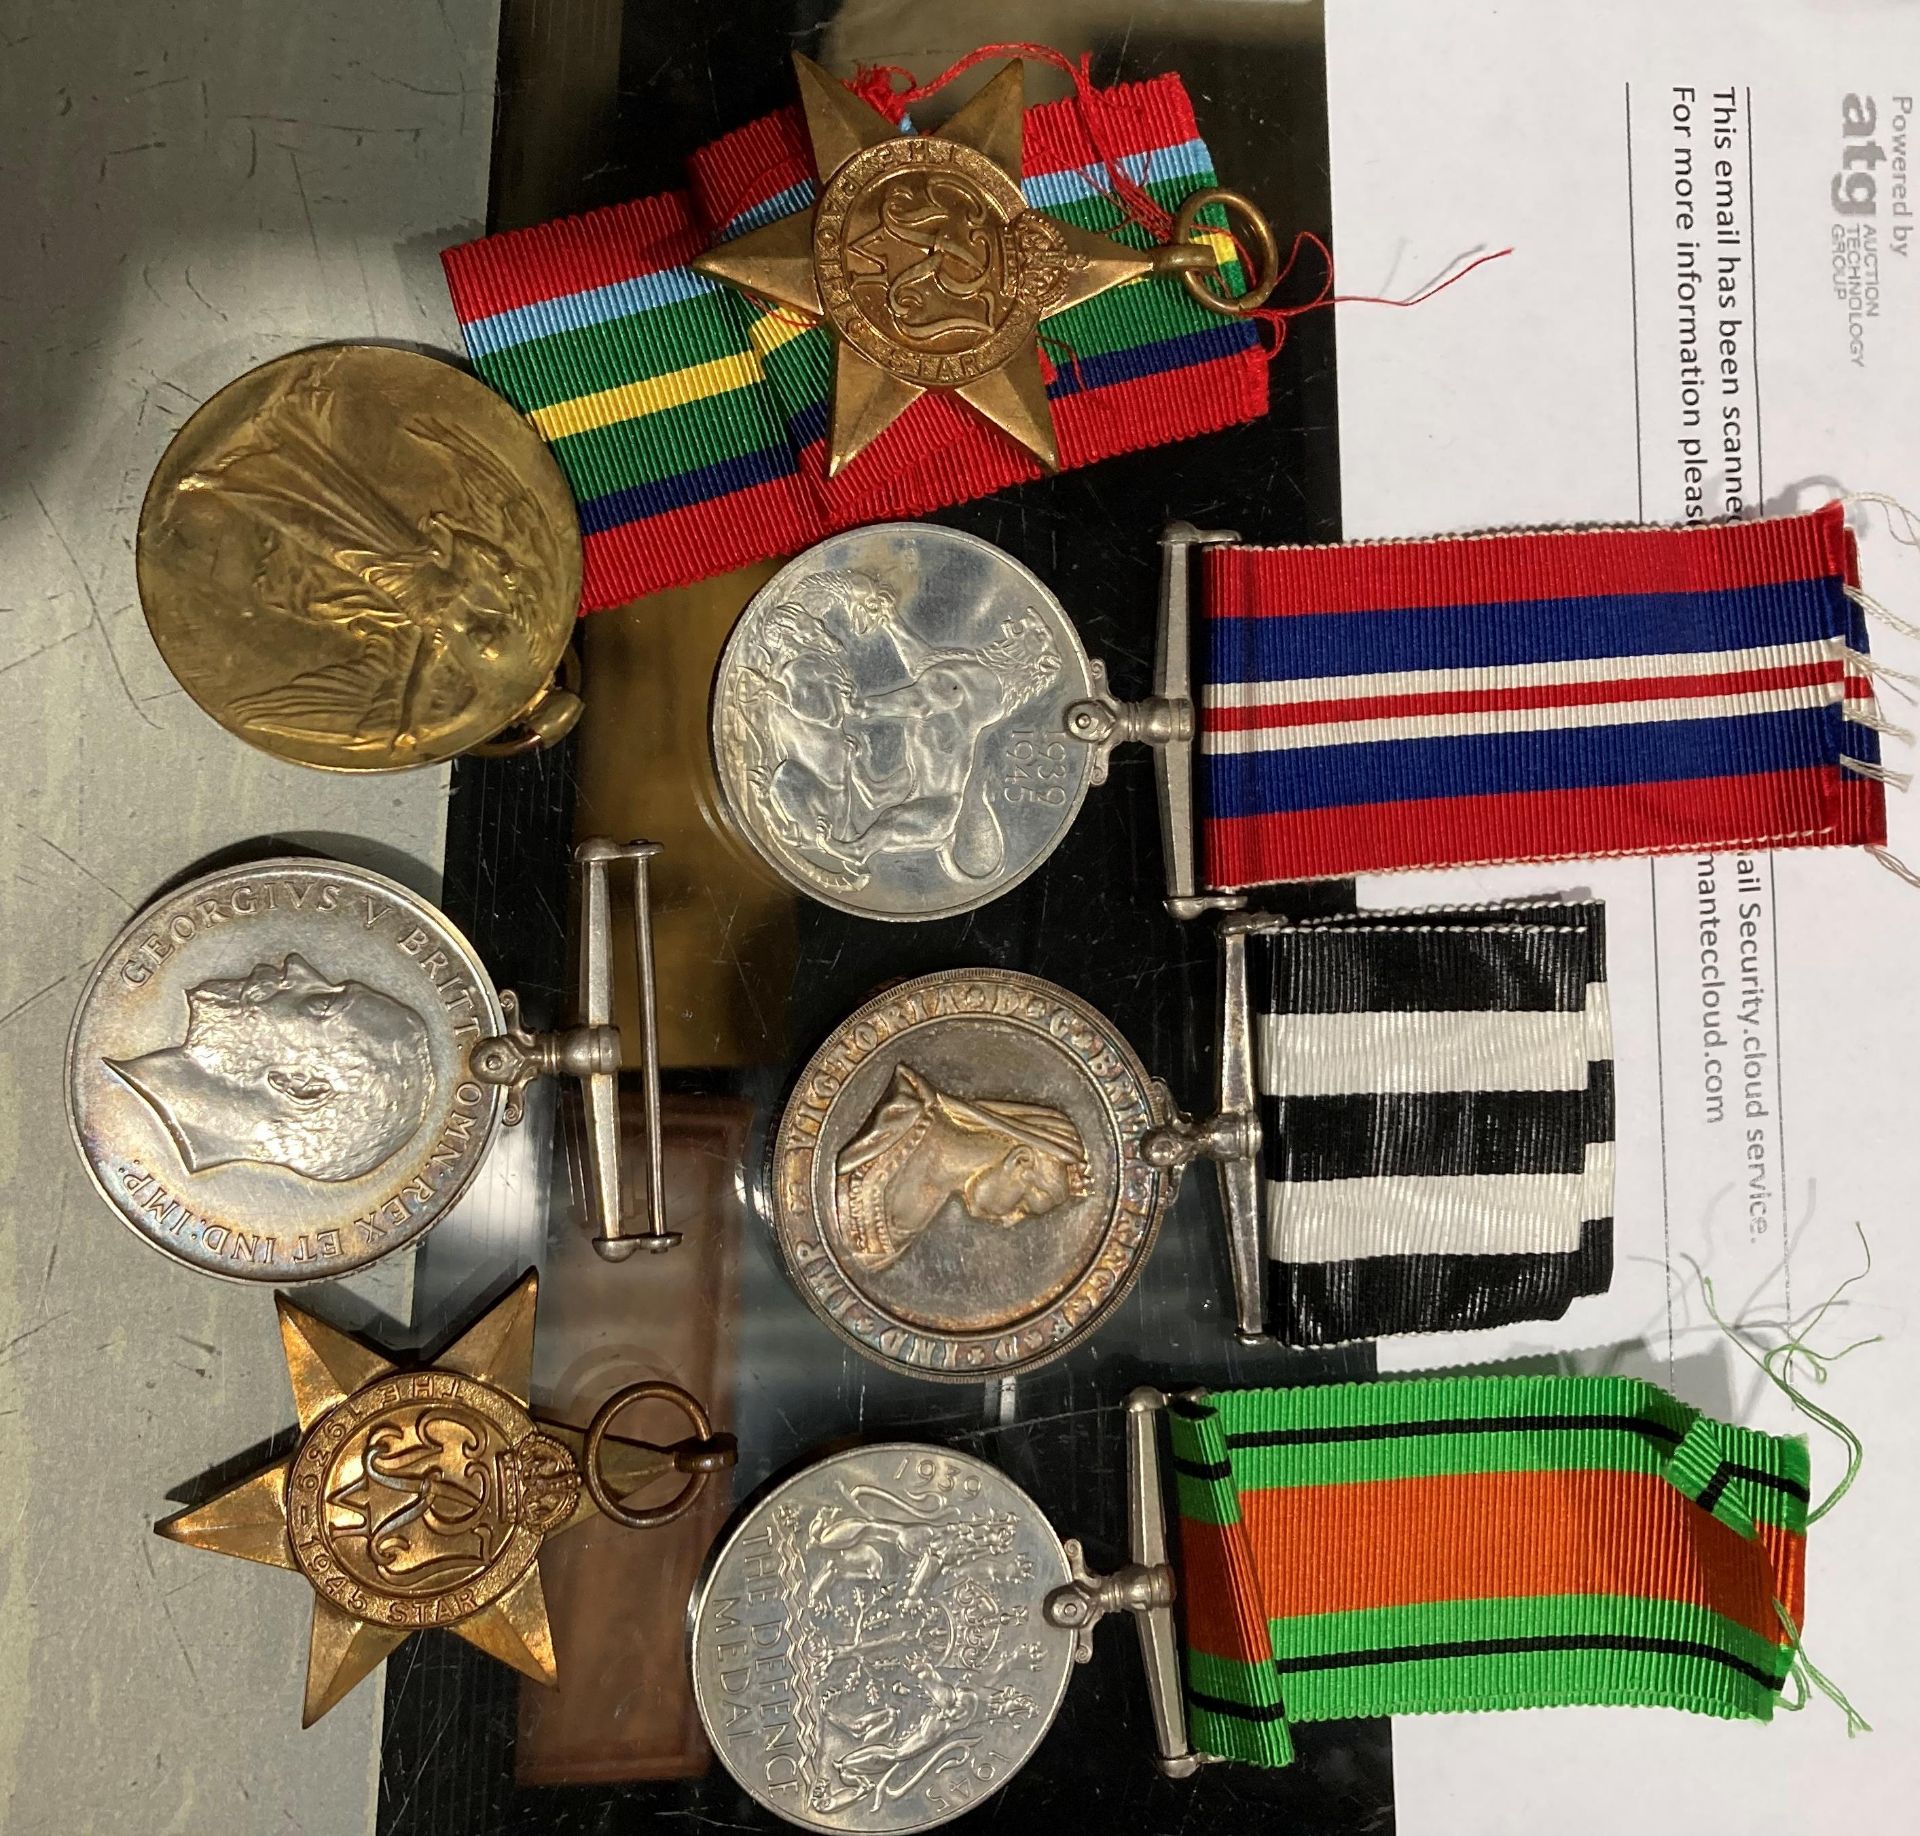 Contents to tray - two First World War medals - British World War Medal 1914-1918 and Victory Medal - Image 8 of 13